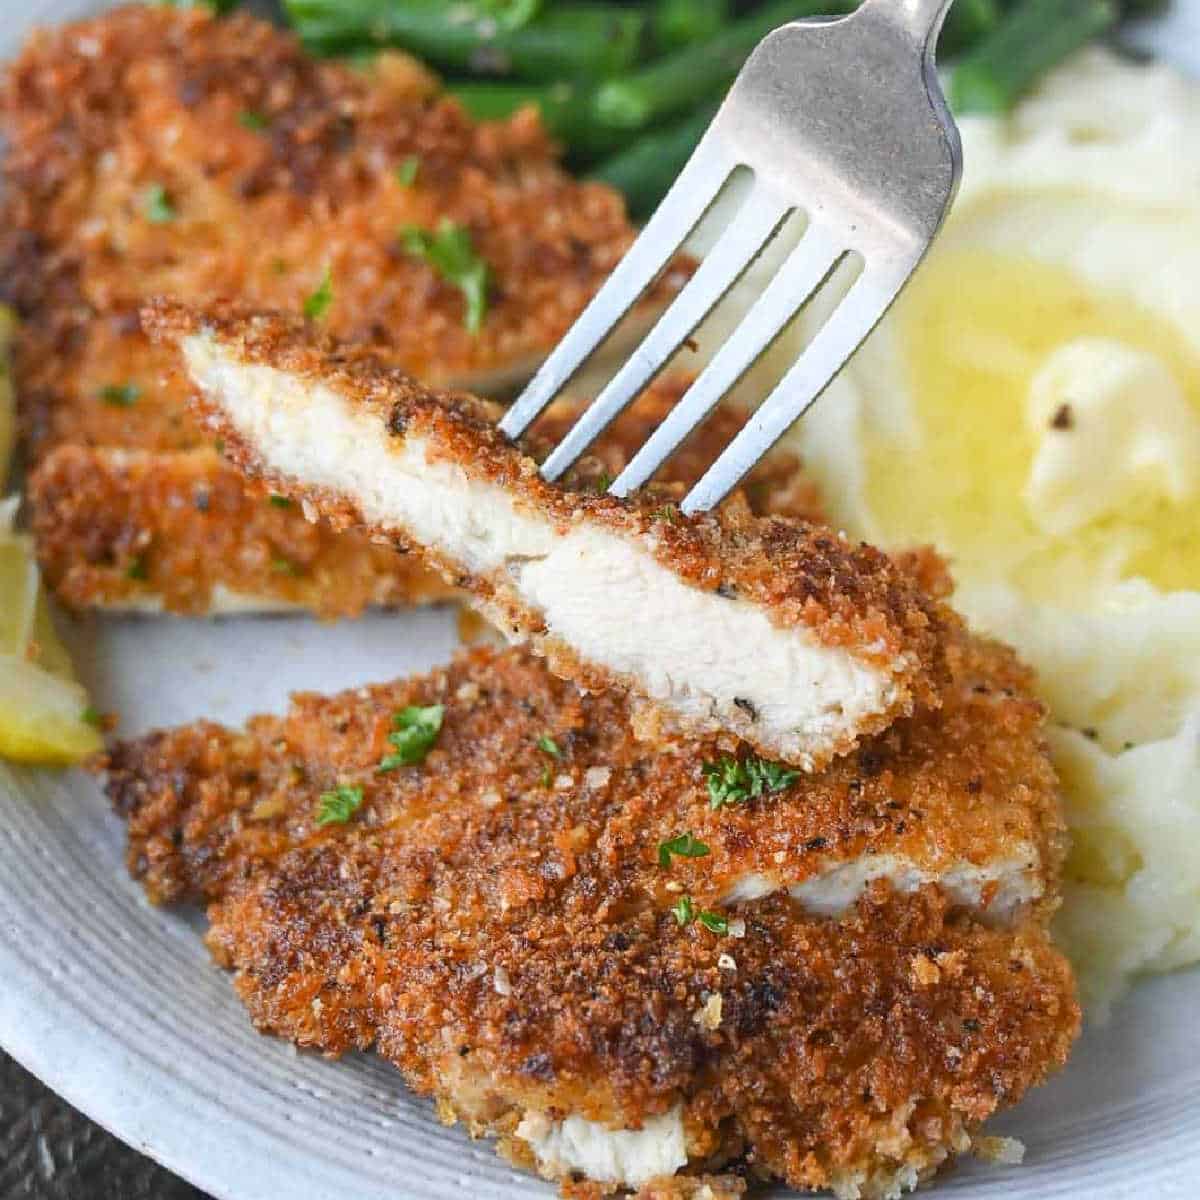 Shallow Fried Chicken Cutlets